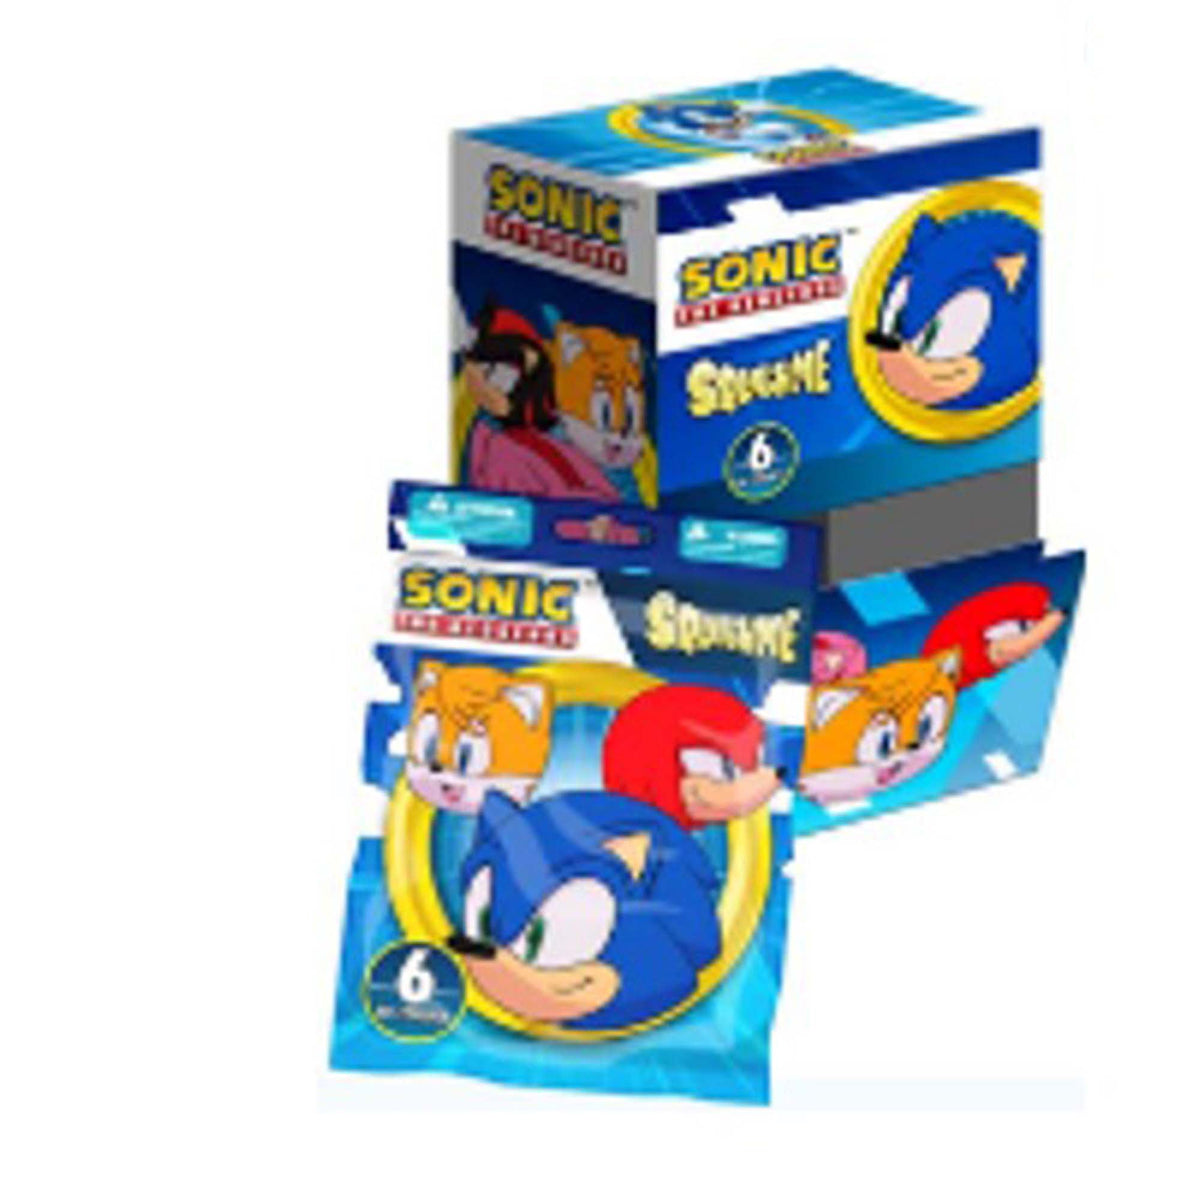 RED PLANET GROUP Toys & Games Sonic the Hedgehog SquishMe S2 Mystery Bag, 1 Count